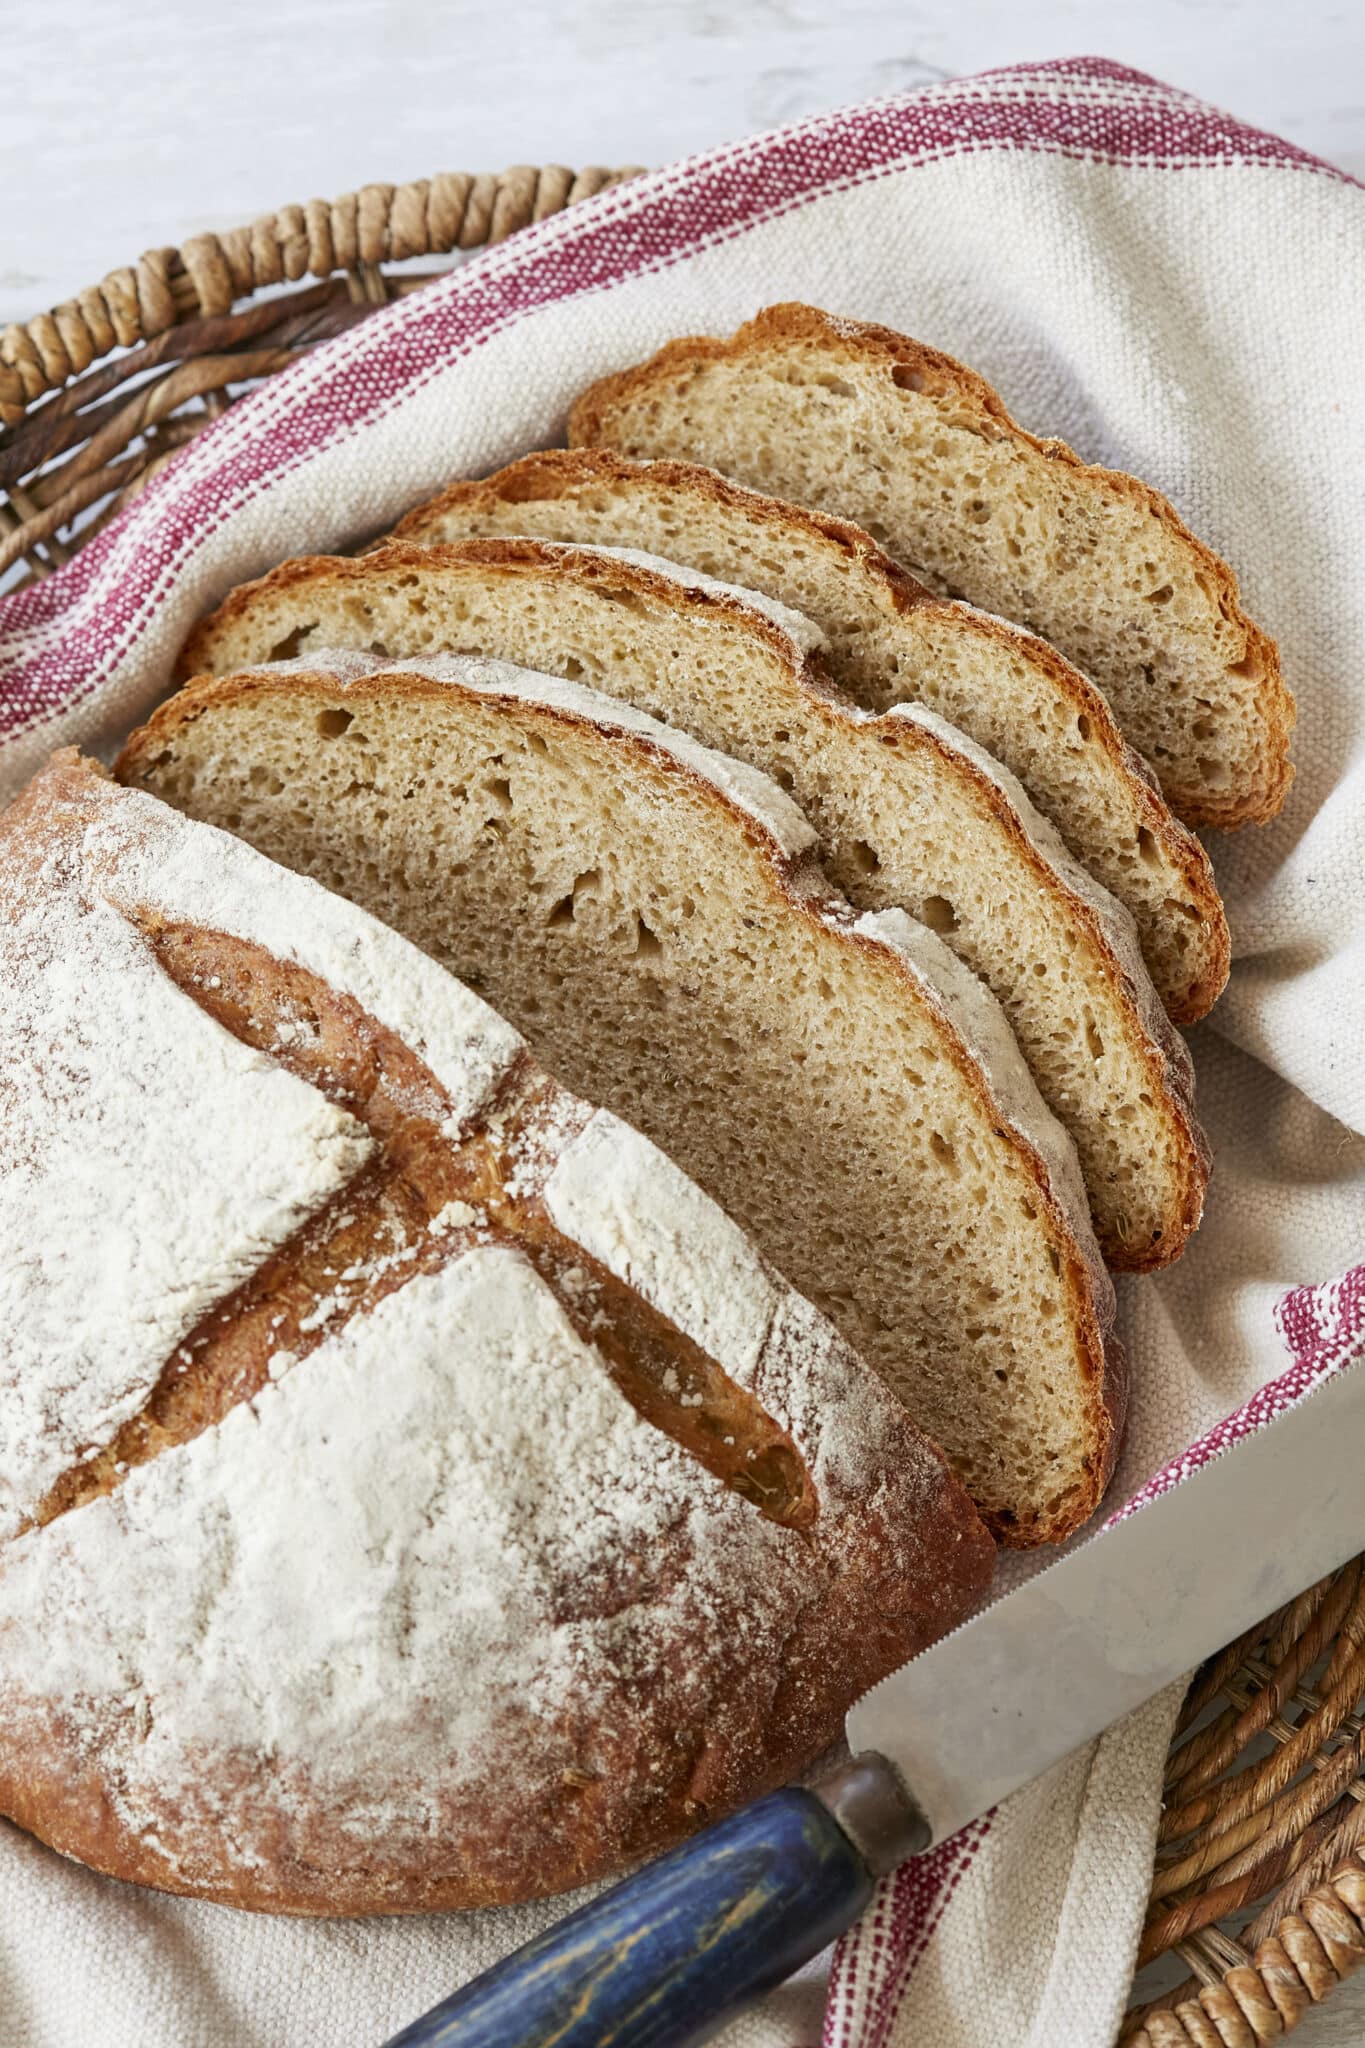 Joululimppu (Finnish Christmas Bread) is a spiced, subtly sweet rye bread and is baked in a round shape scored cross on top. It's dusted with flour and sliced in a basket lined with a kitchen towel. 